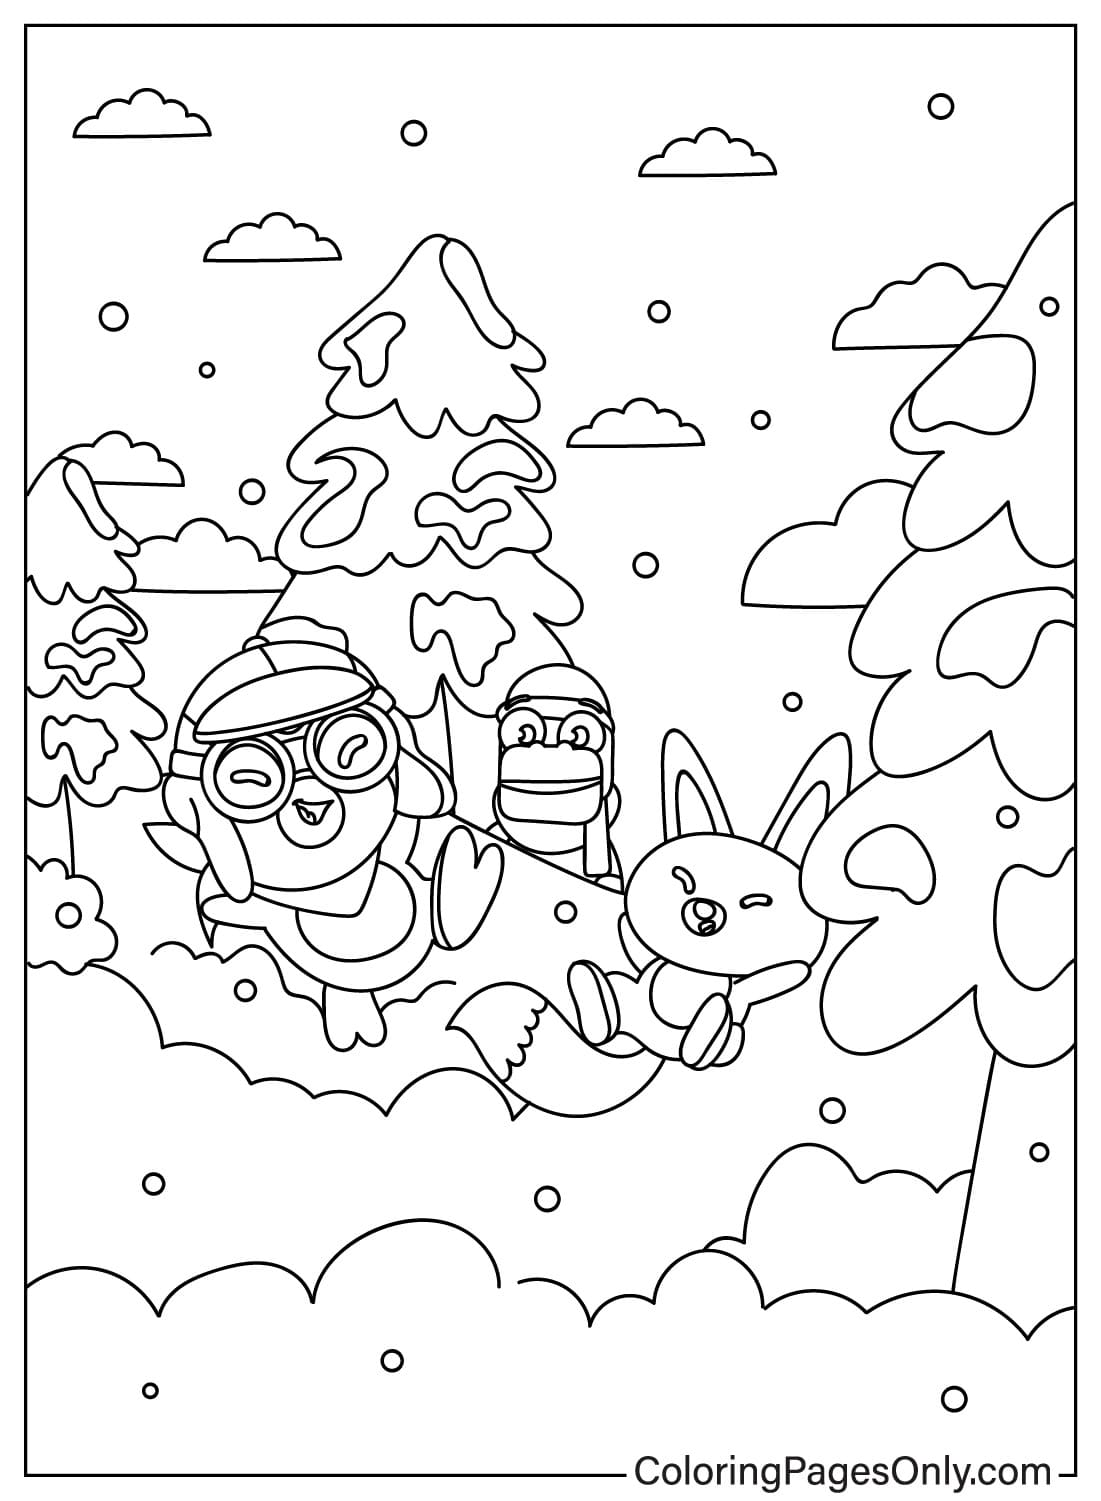 Images Pororo the Little Penguin Coloring Page from Pororo the Little Penguin